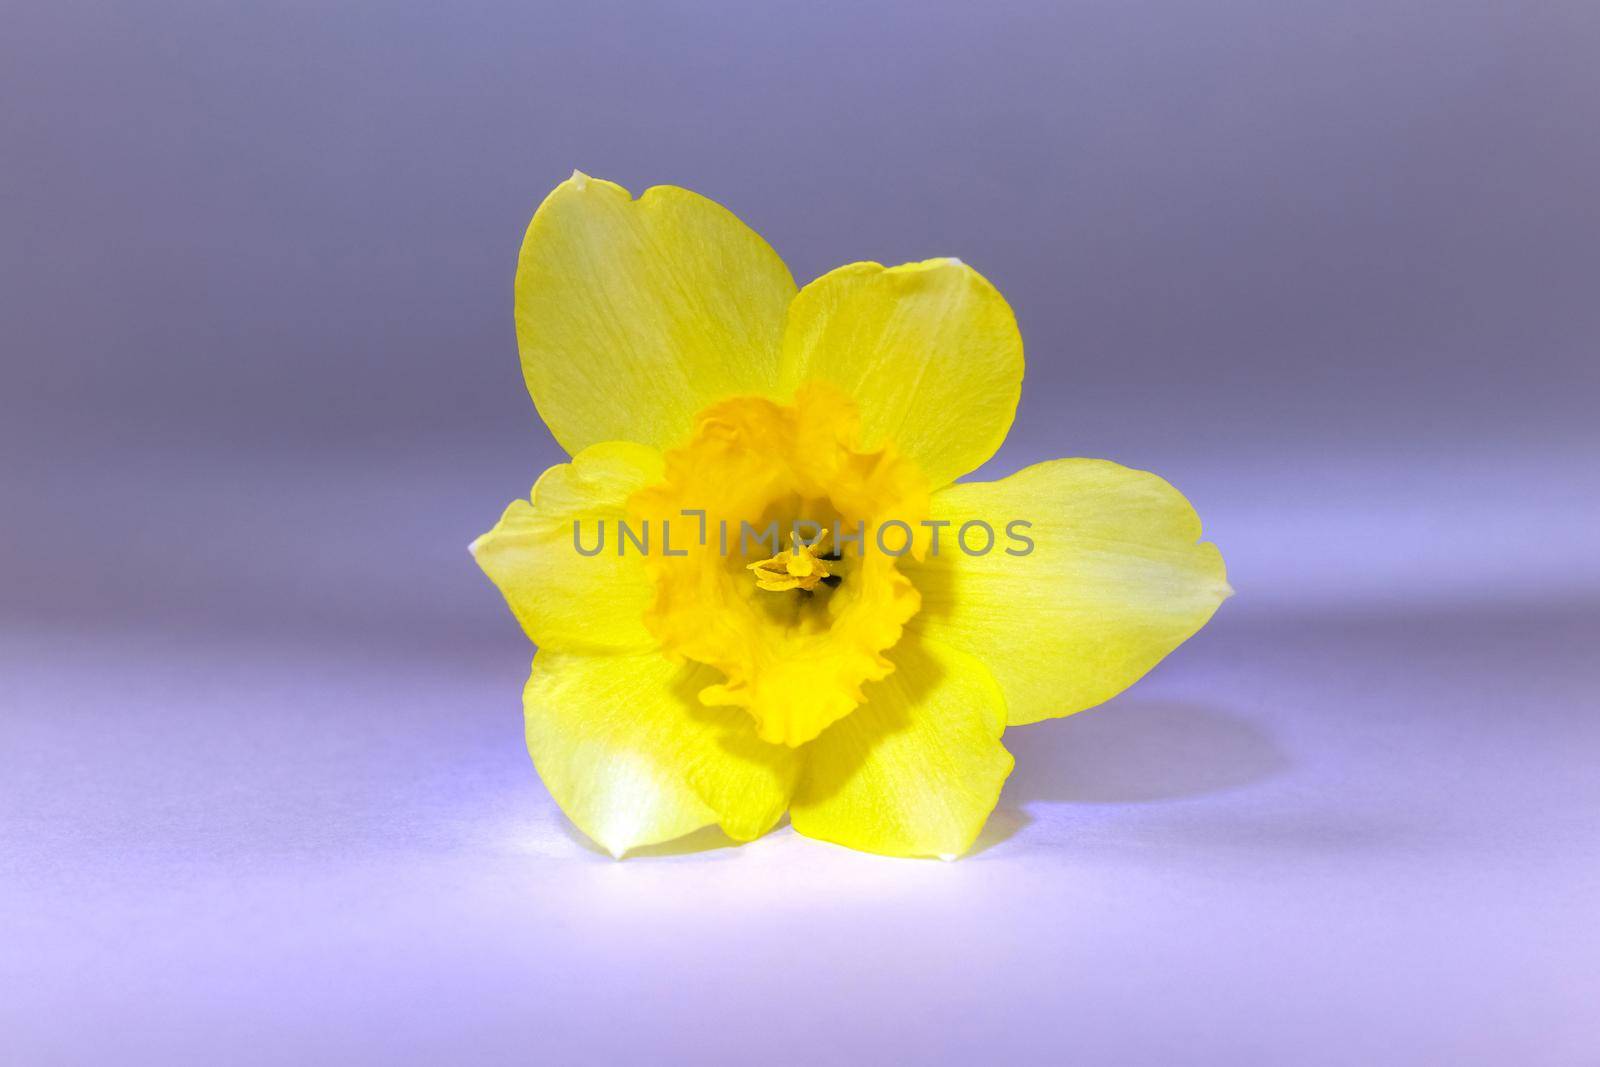 yellow daffodil on a plain background isolate by roman112007